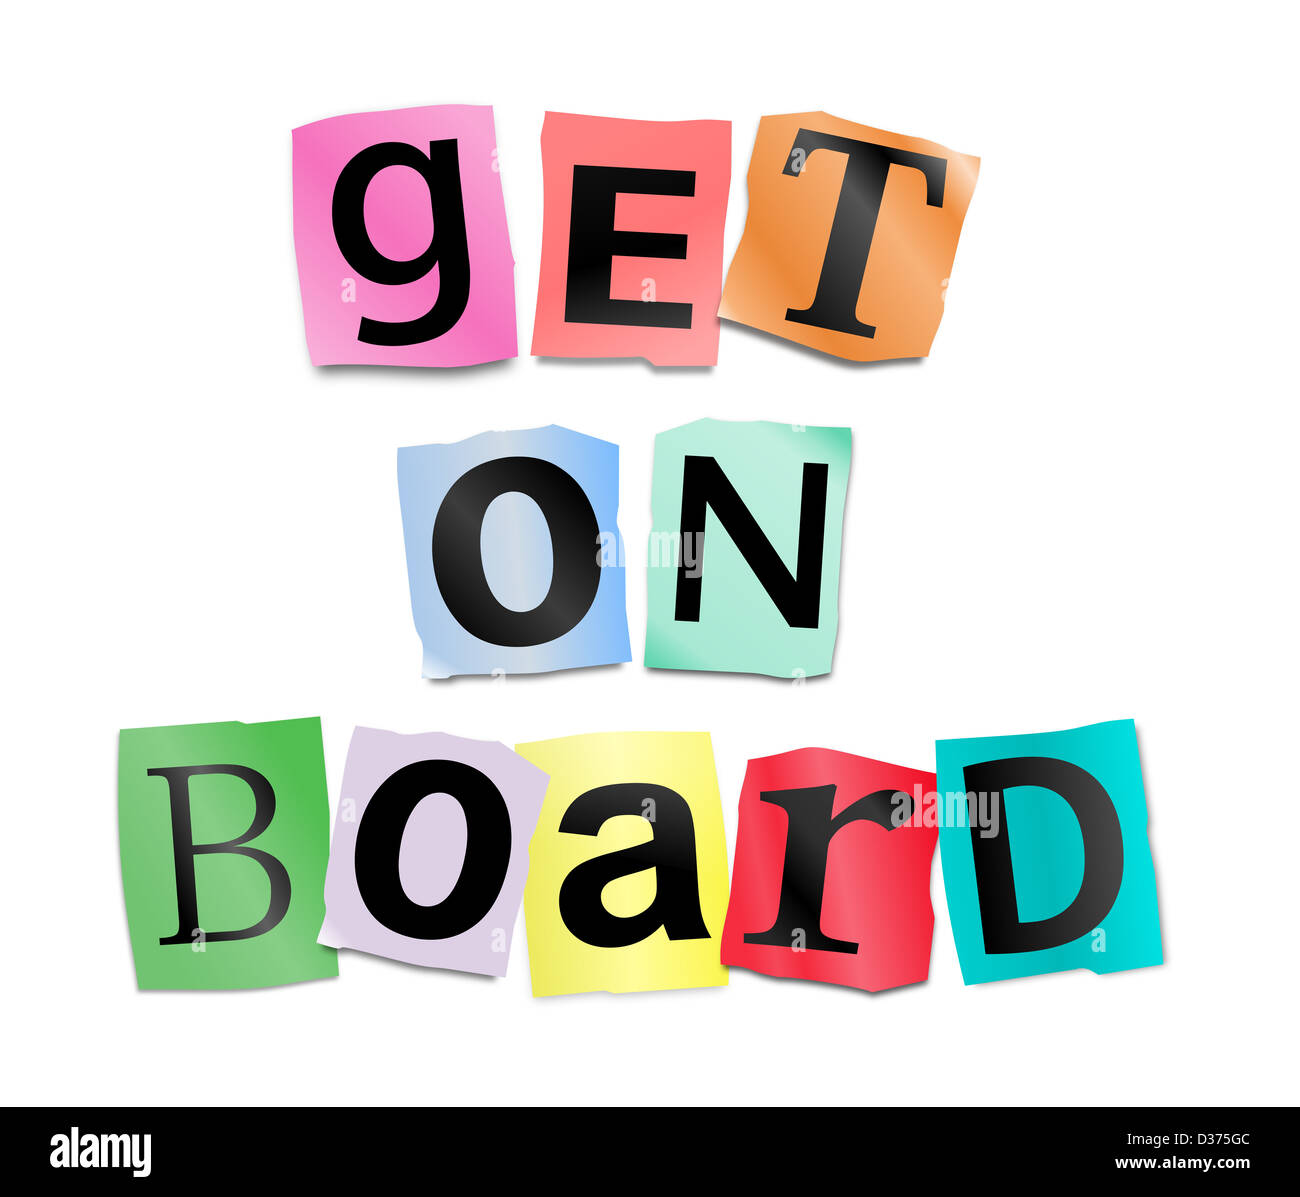 Get on board concept. Stock Photo